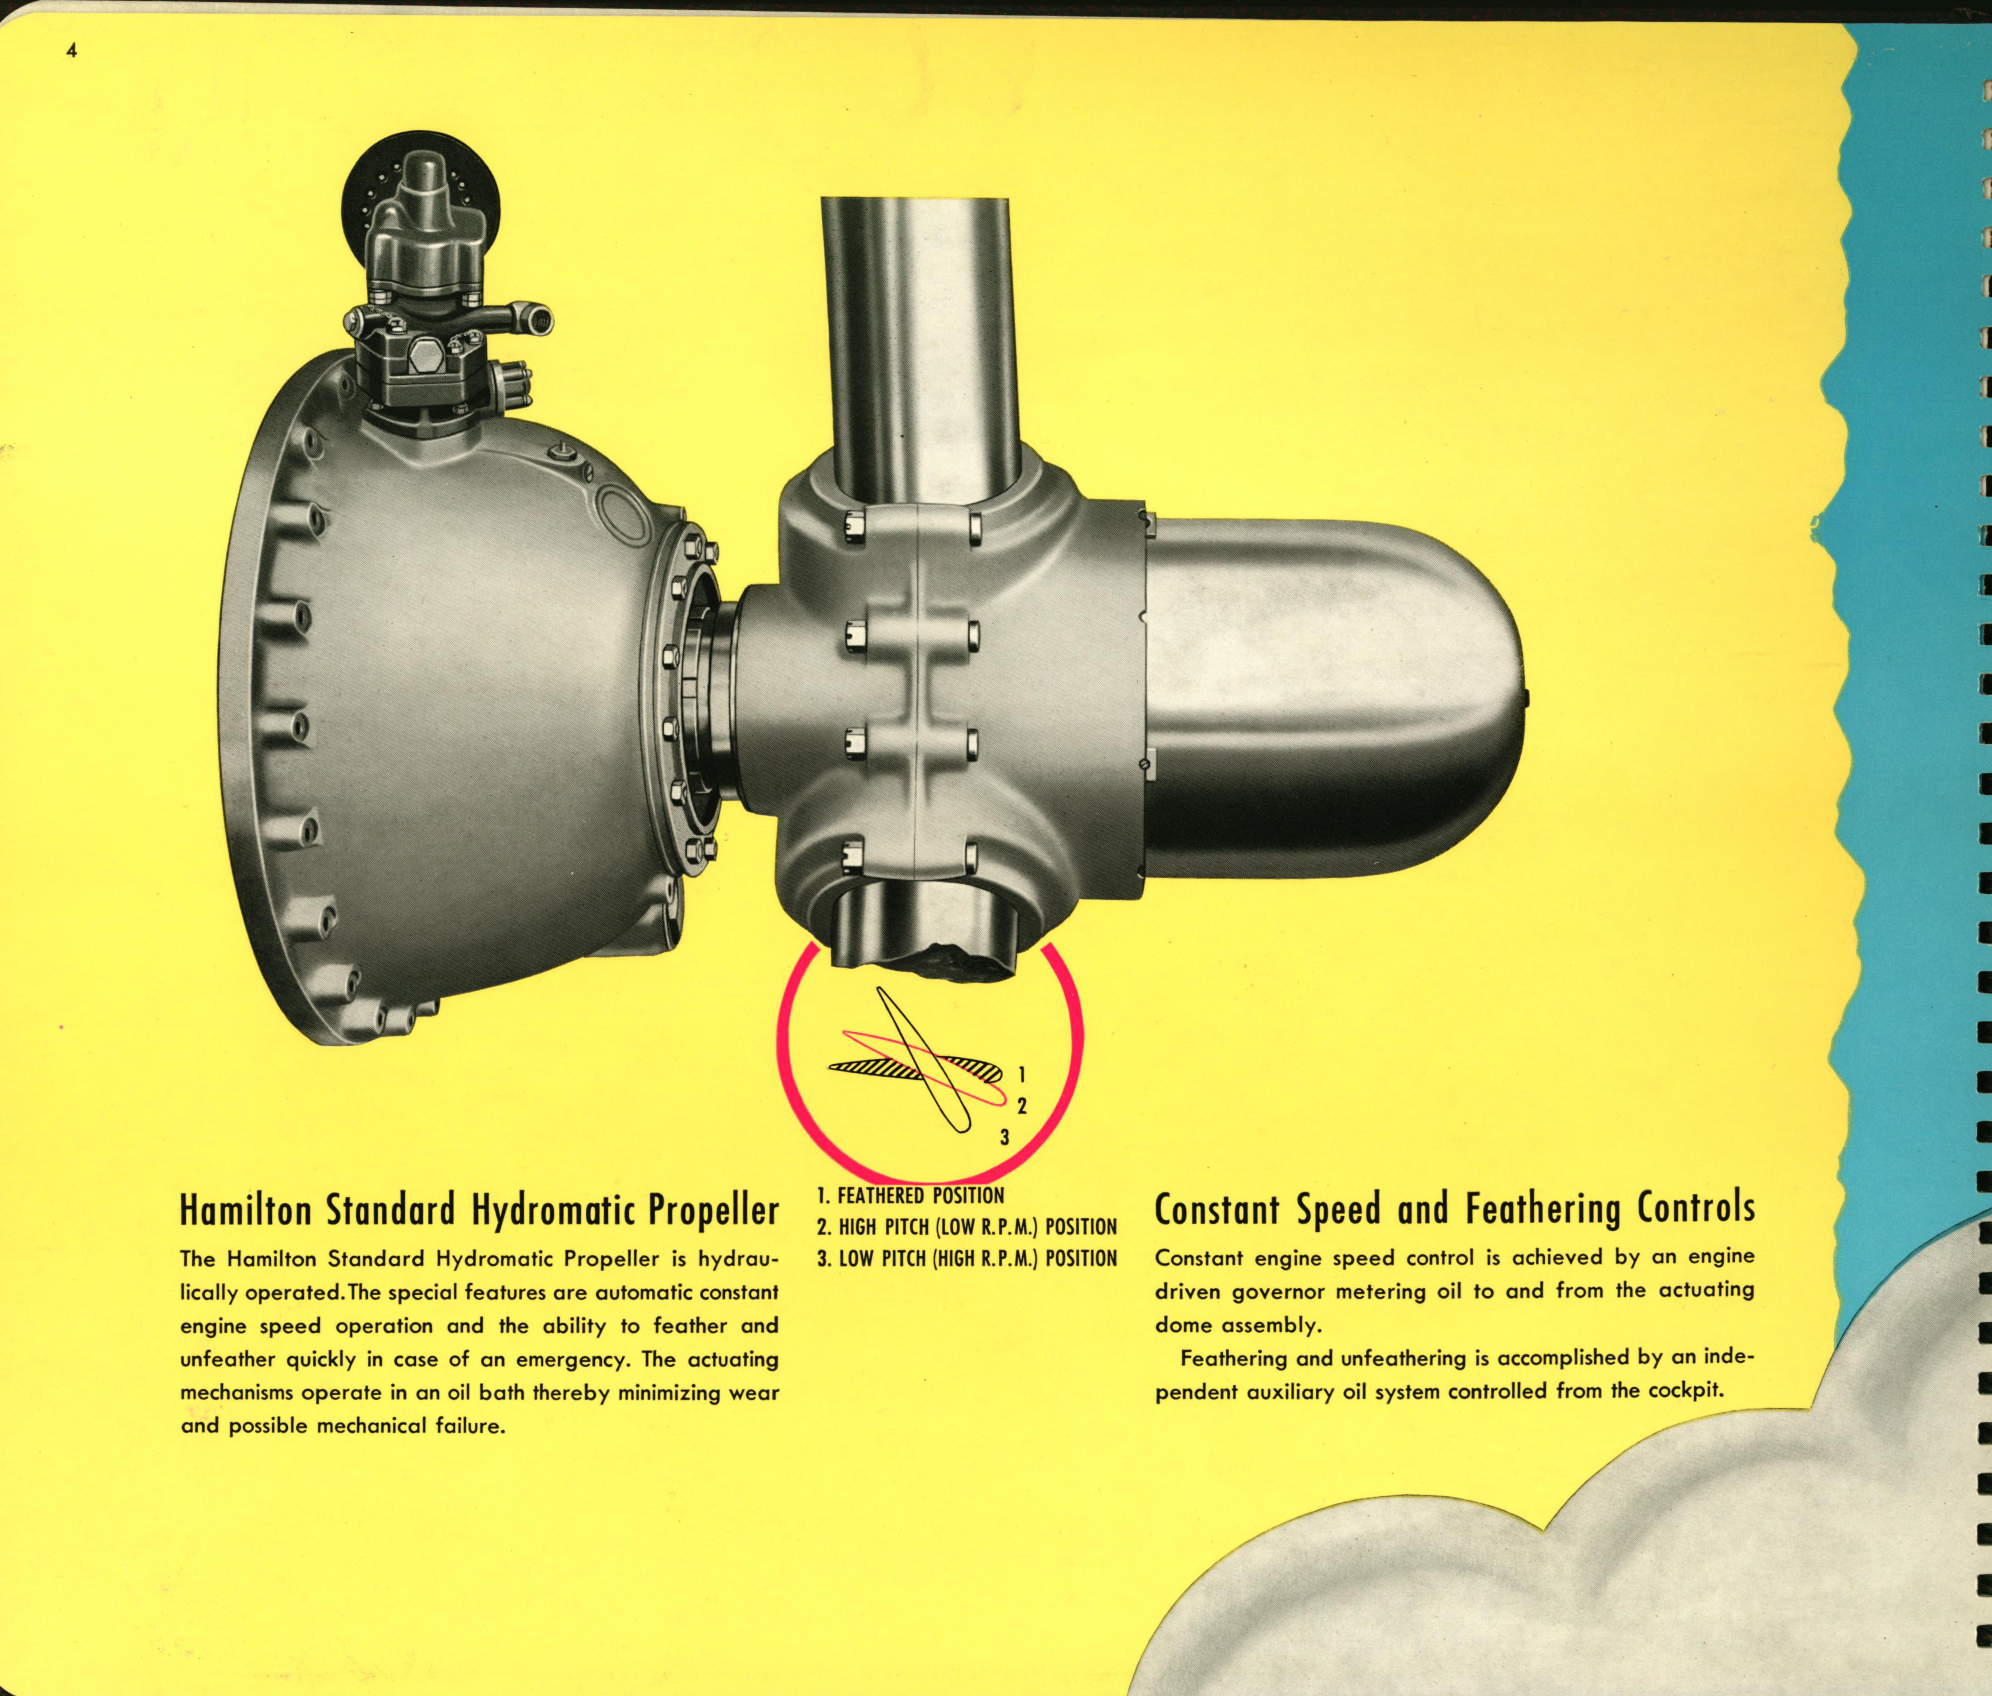 Sample page 5 from AirCorps Library document: Hamilton Standard Hydromatic Quick-Feathering Propellers